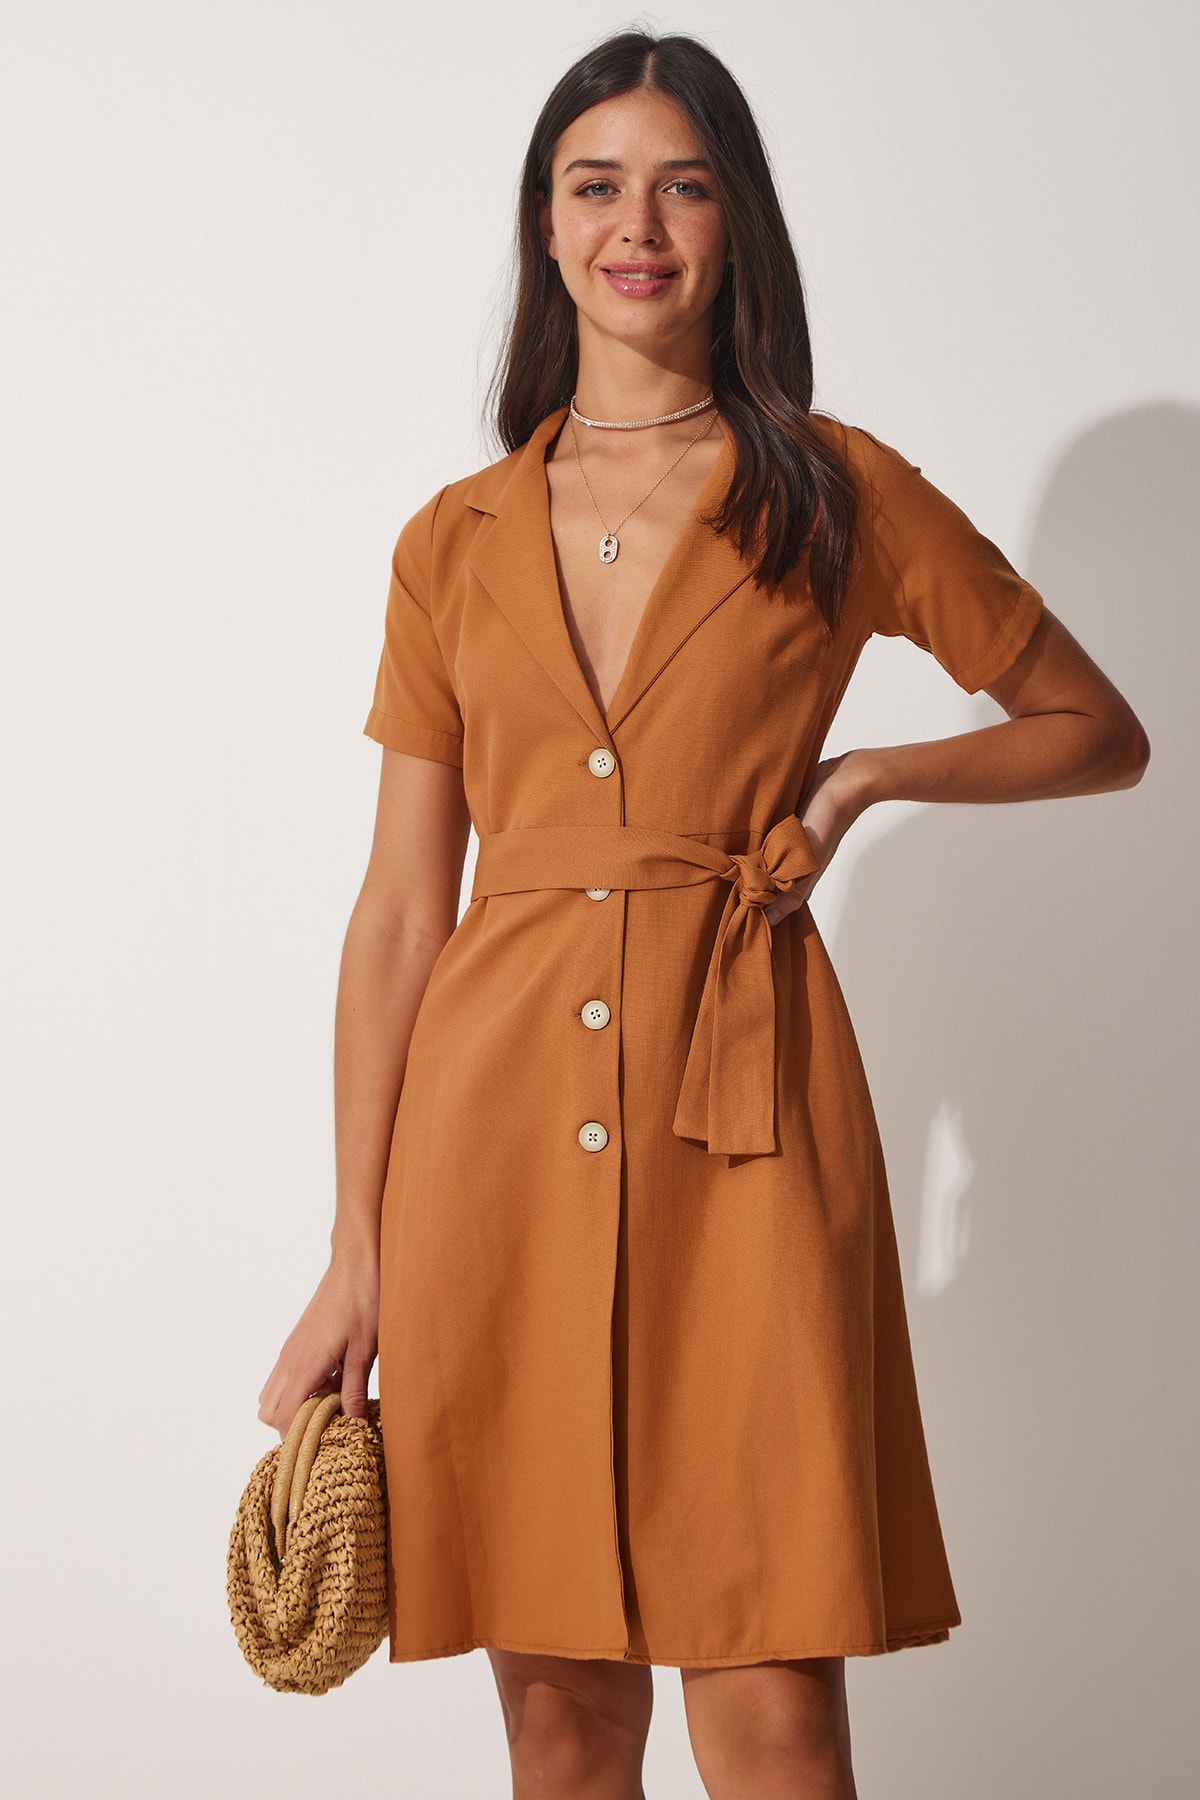 Happiness İstanbul Women's Tan Belted Woven Shirt Dress